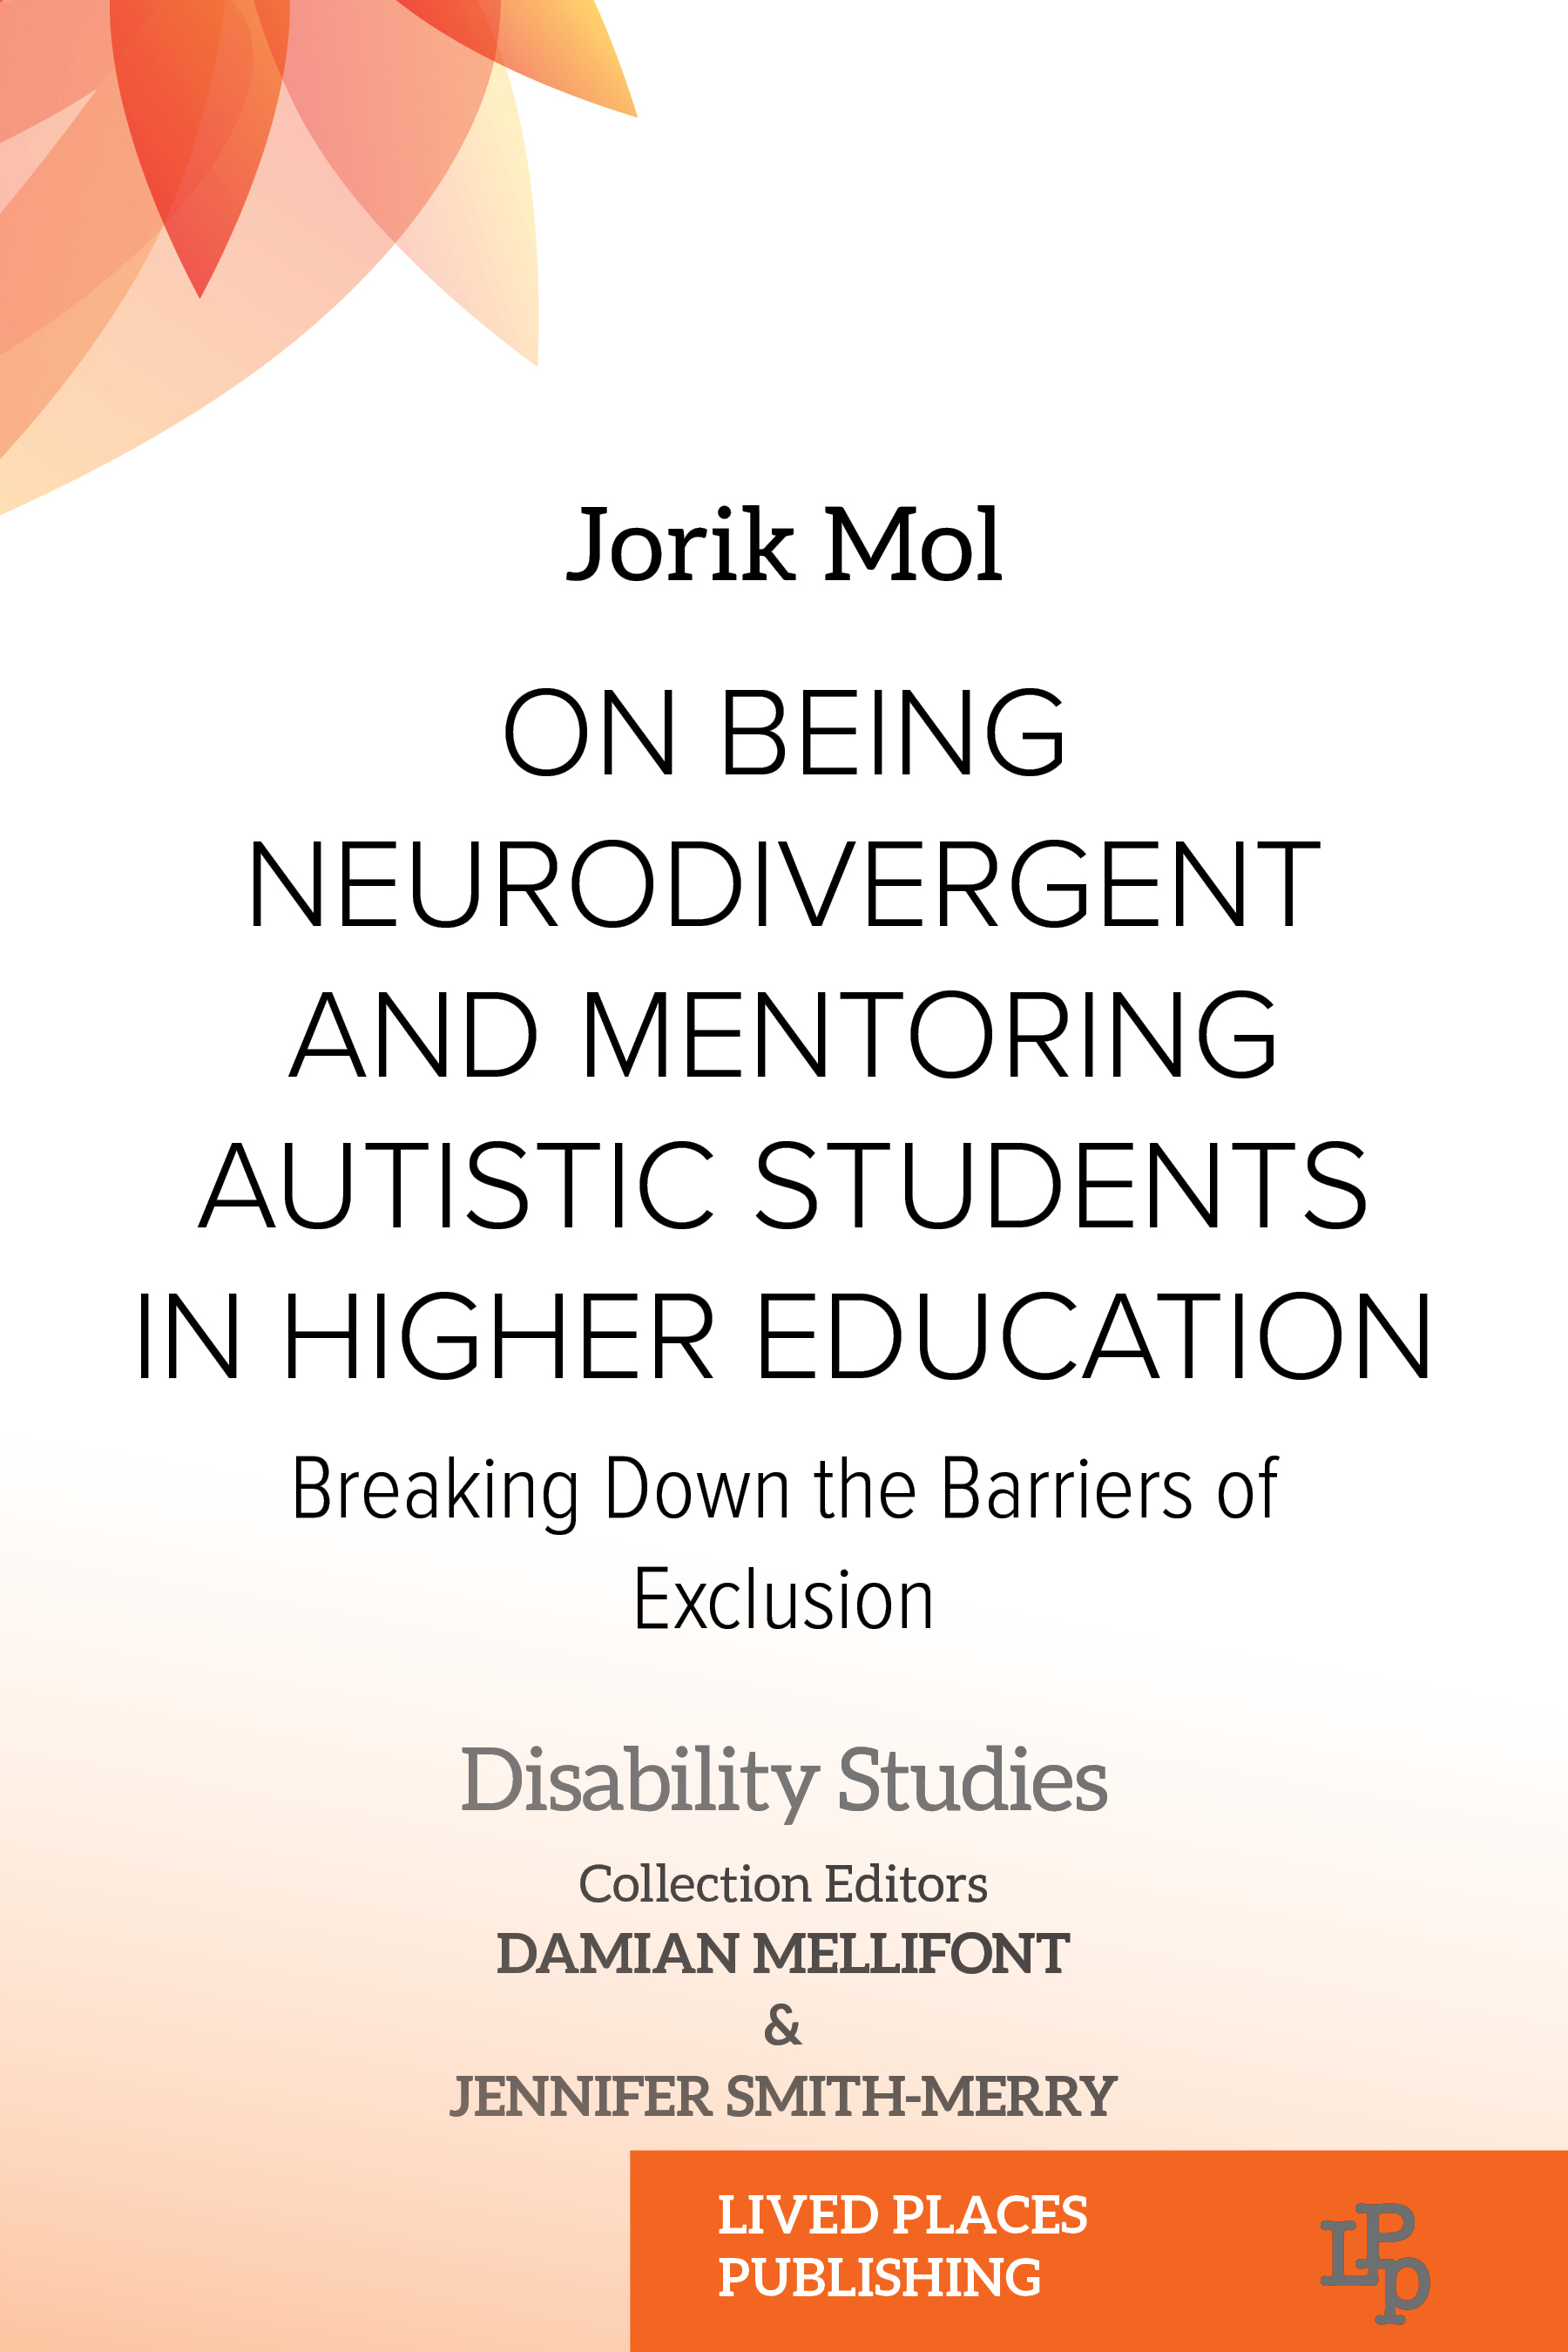 On Being Neurodivergent and Mentoring Autistic Students in Higher Education